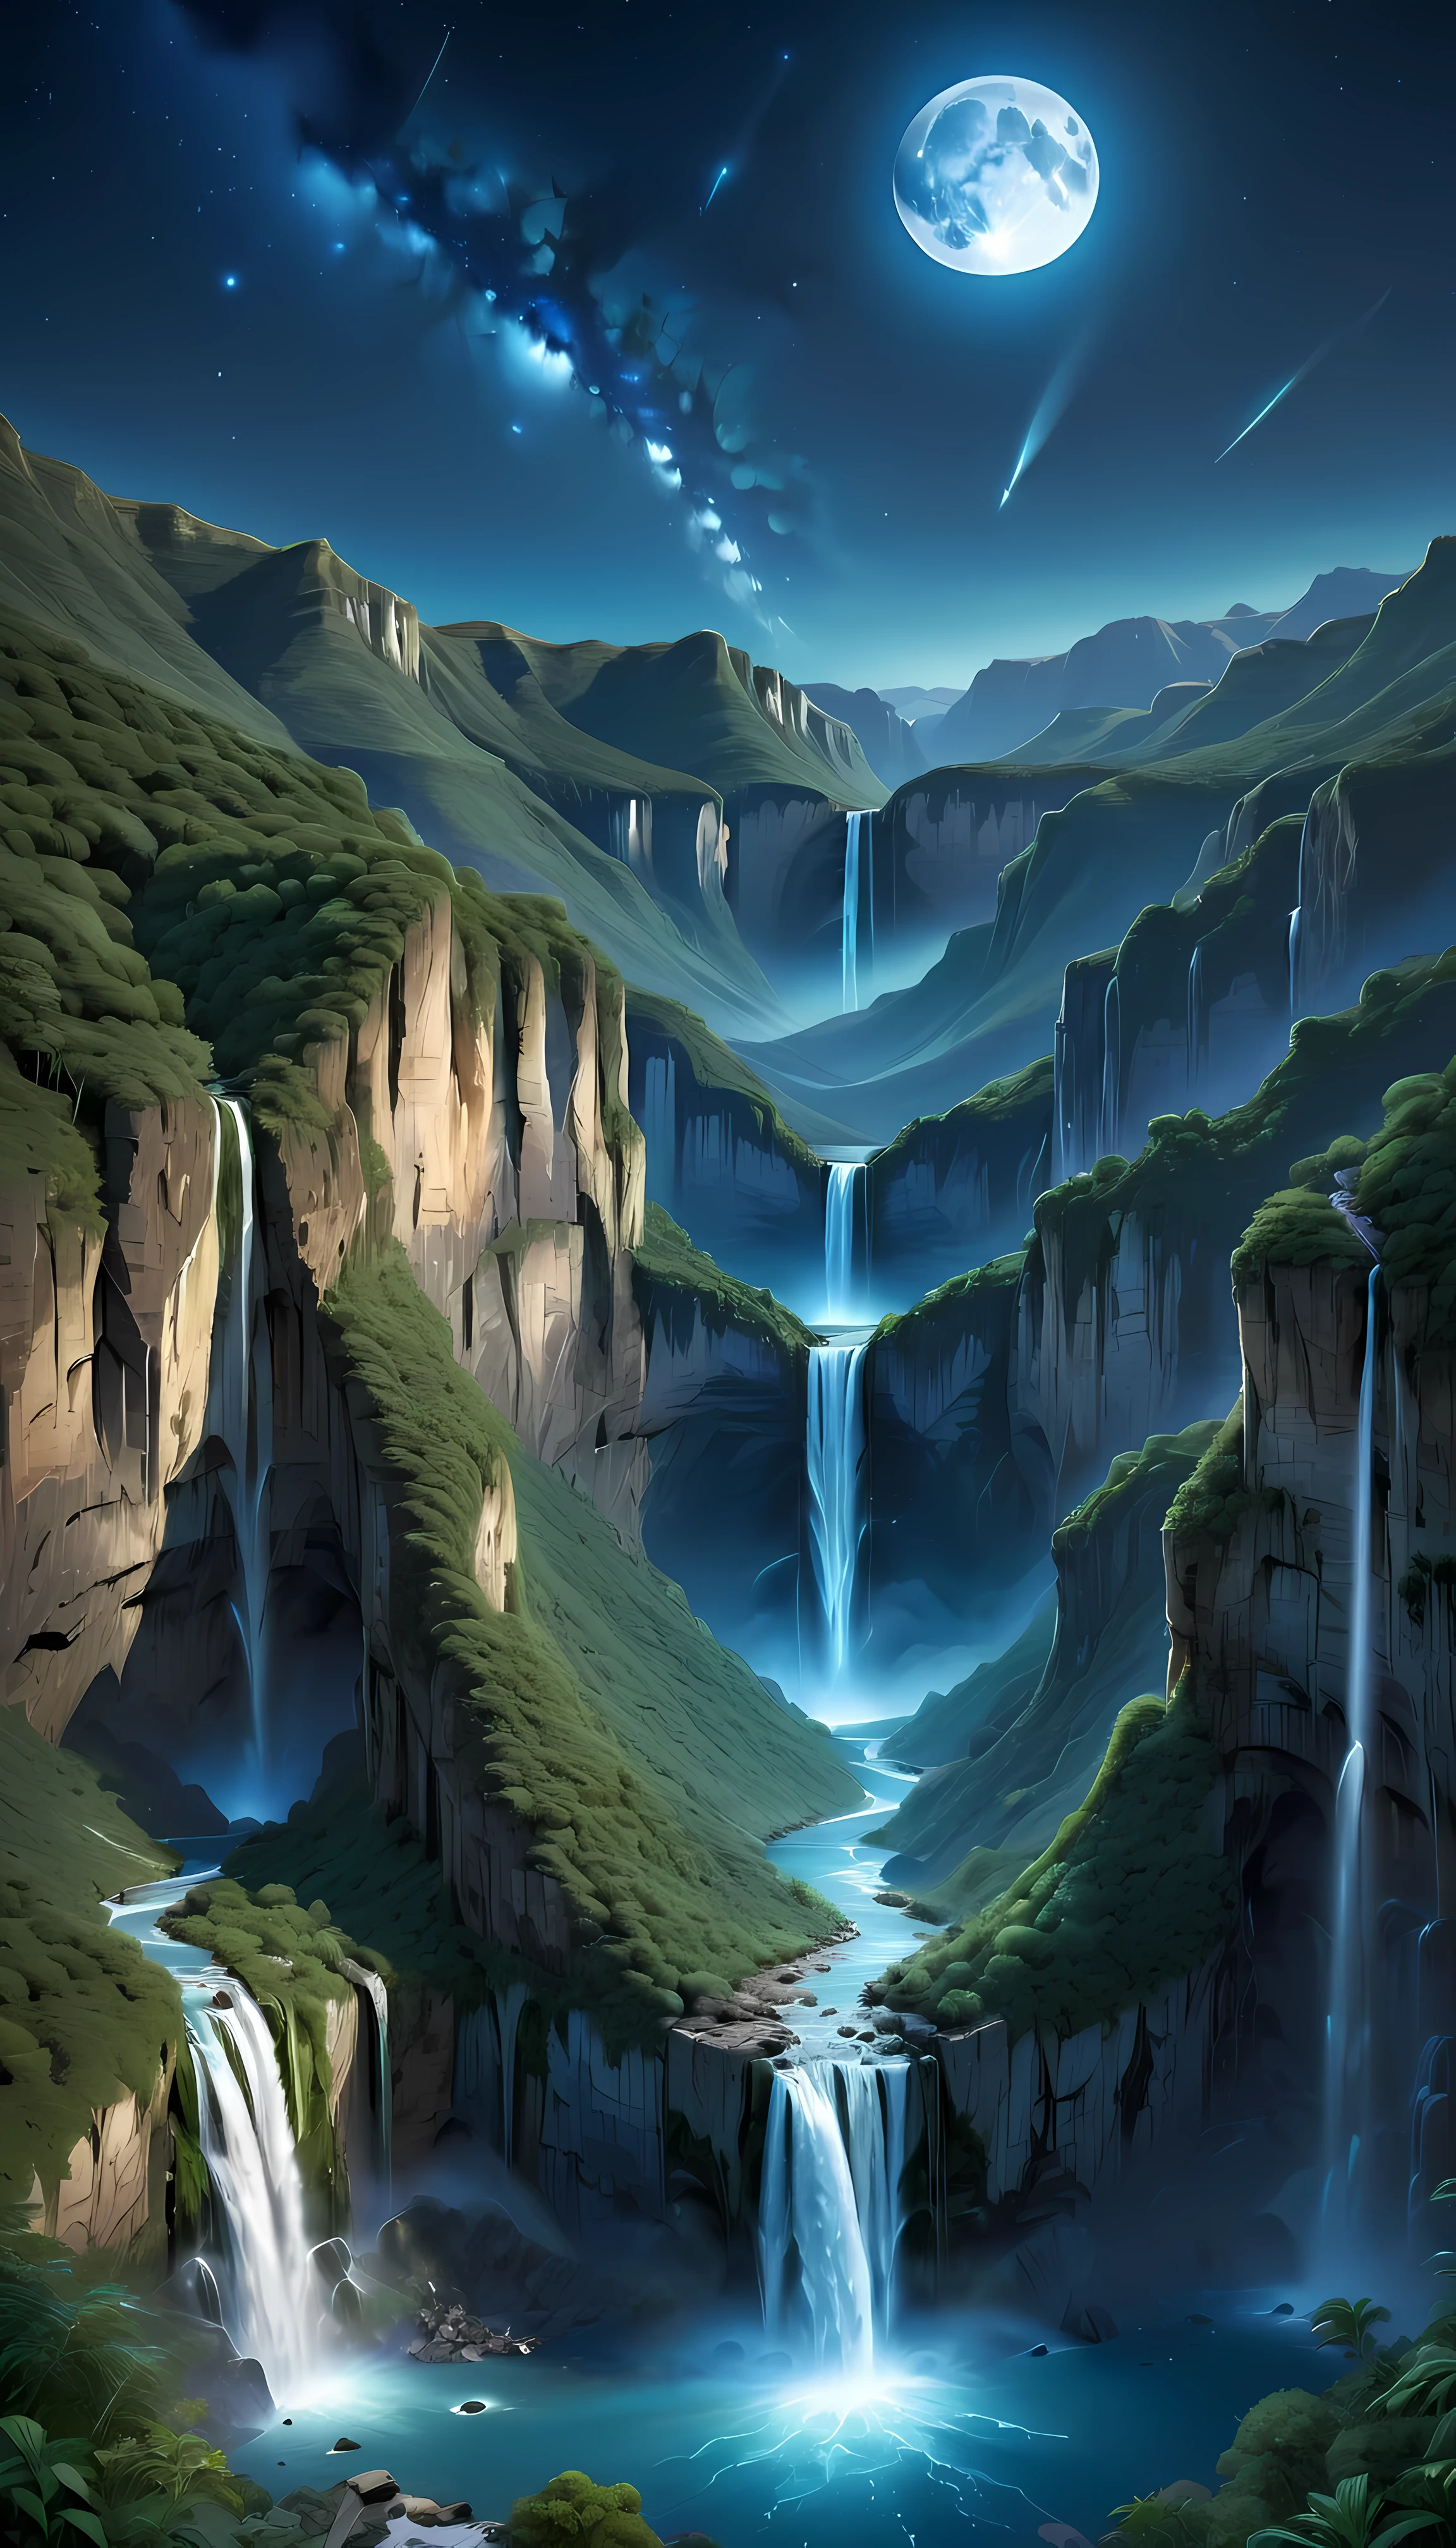 Towering steep and towering high waterfall cliff garden wild, asymmetric waterfall canyon,
Coexistence with the natural environment, waterfall canyon night, clear night sky, meteors across, moonlight, extremely detailed, best quality, masterpiece, high resolution, Hyperrealistic, 8K, top-view,  high angle view, Blue Color Palette, Minimalism.